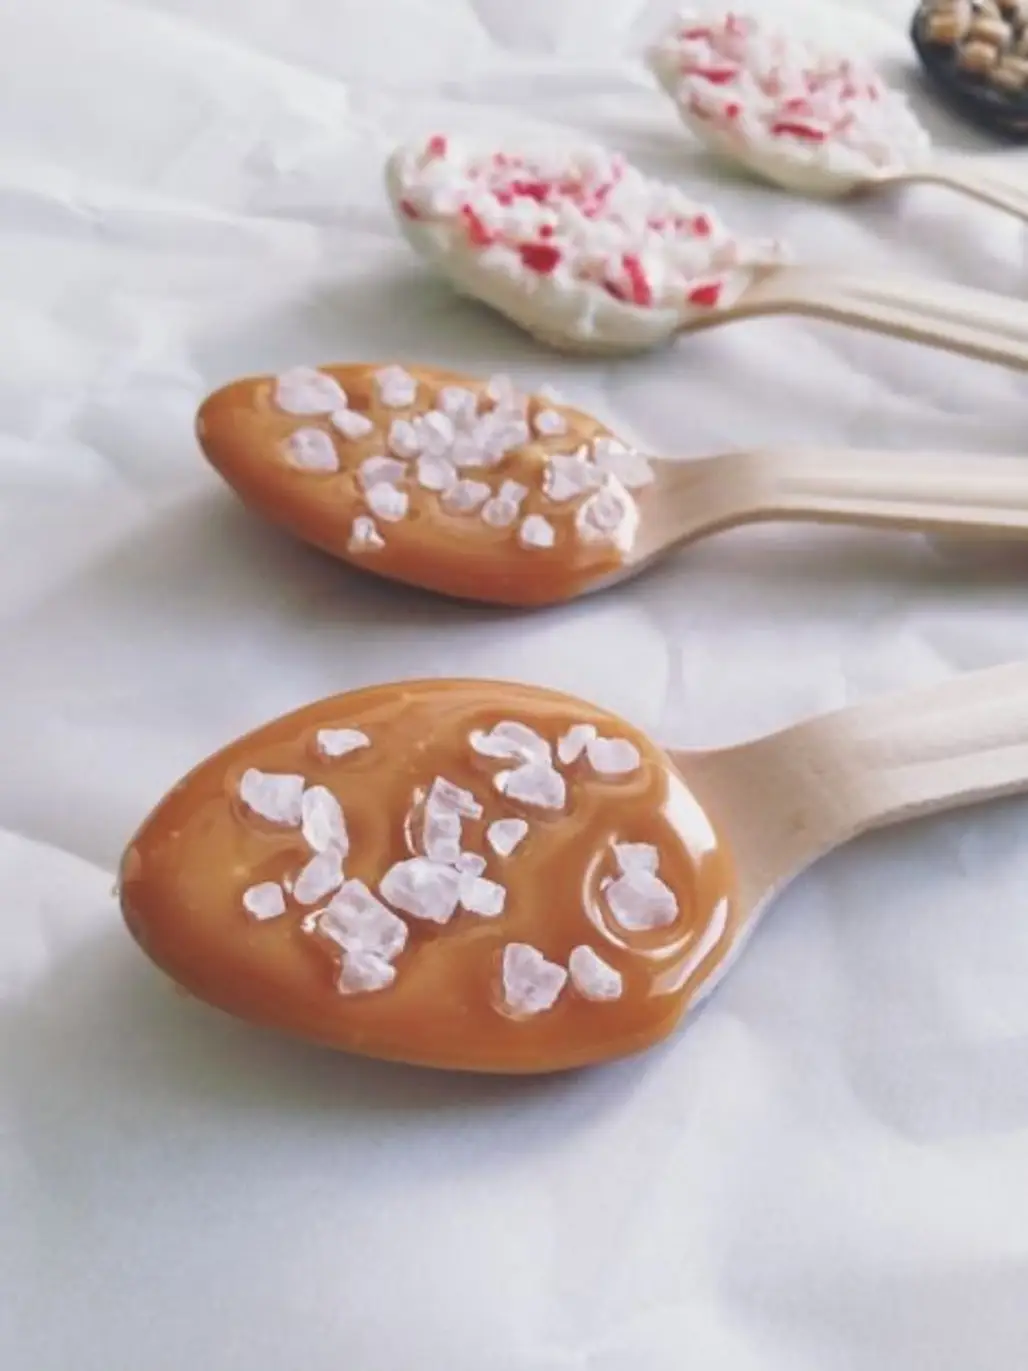 More Hot Chocolate Spoons